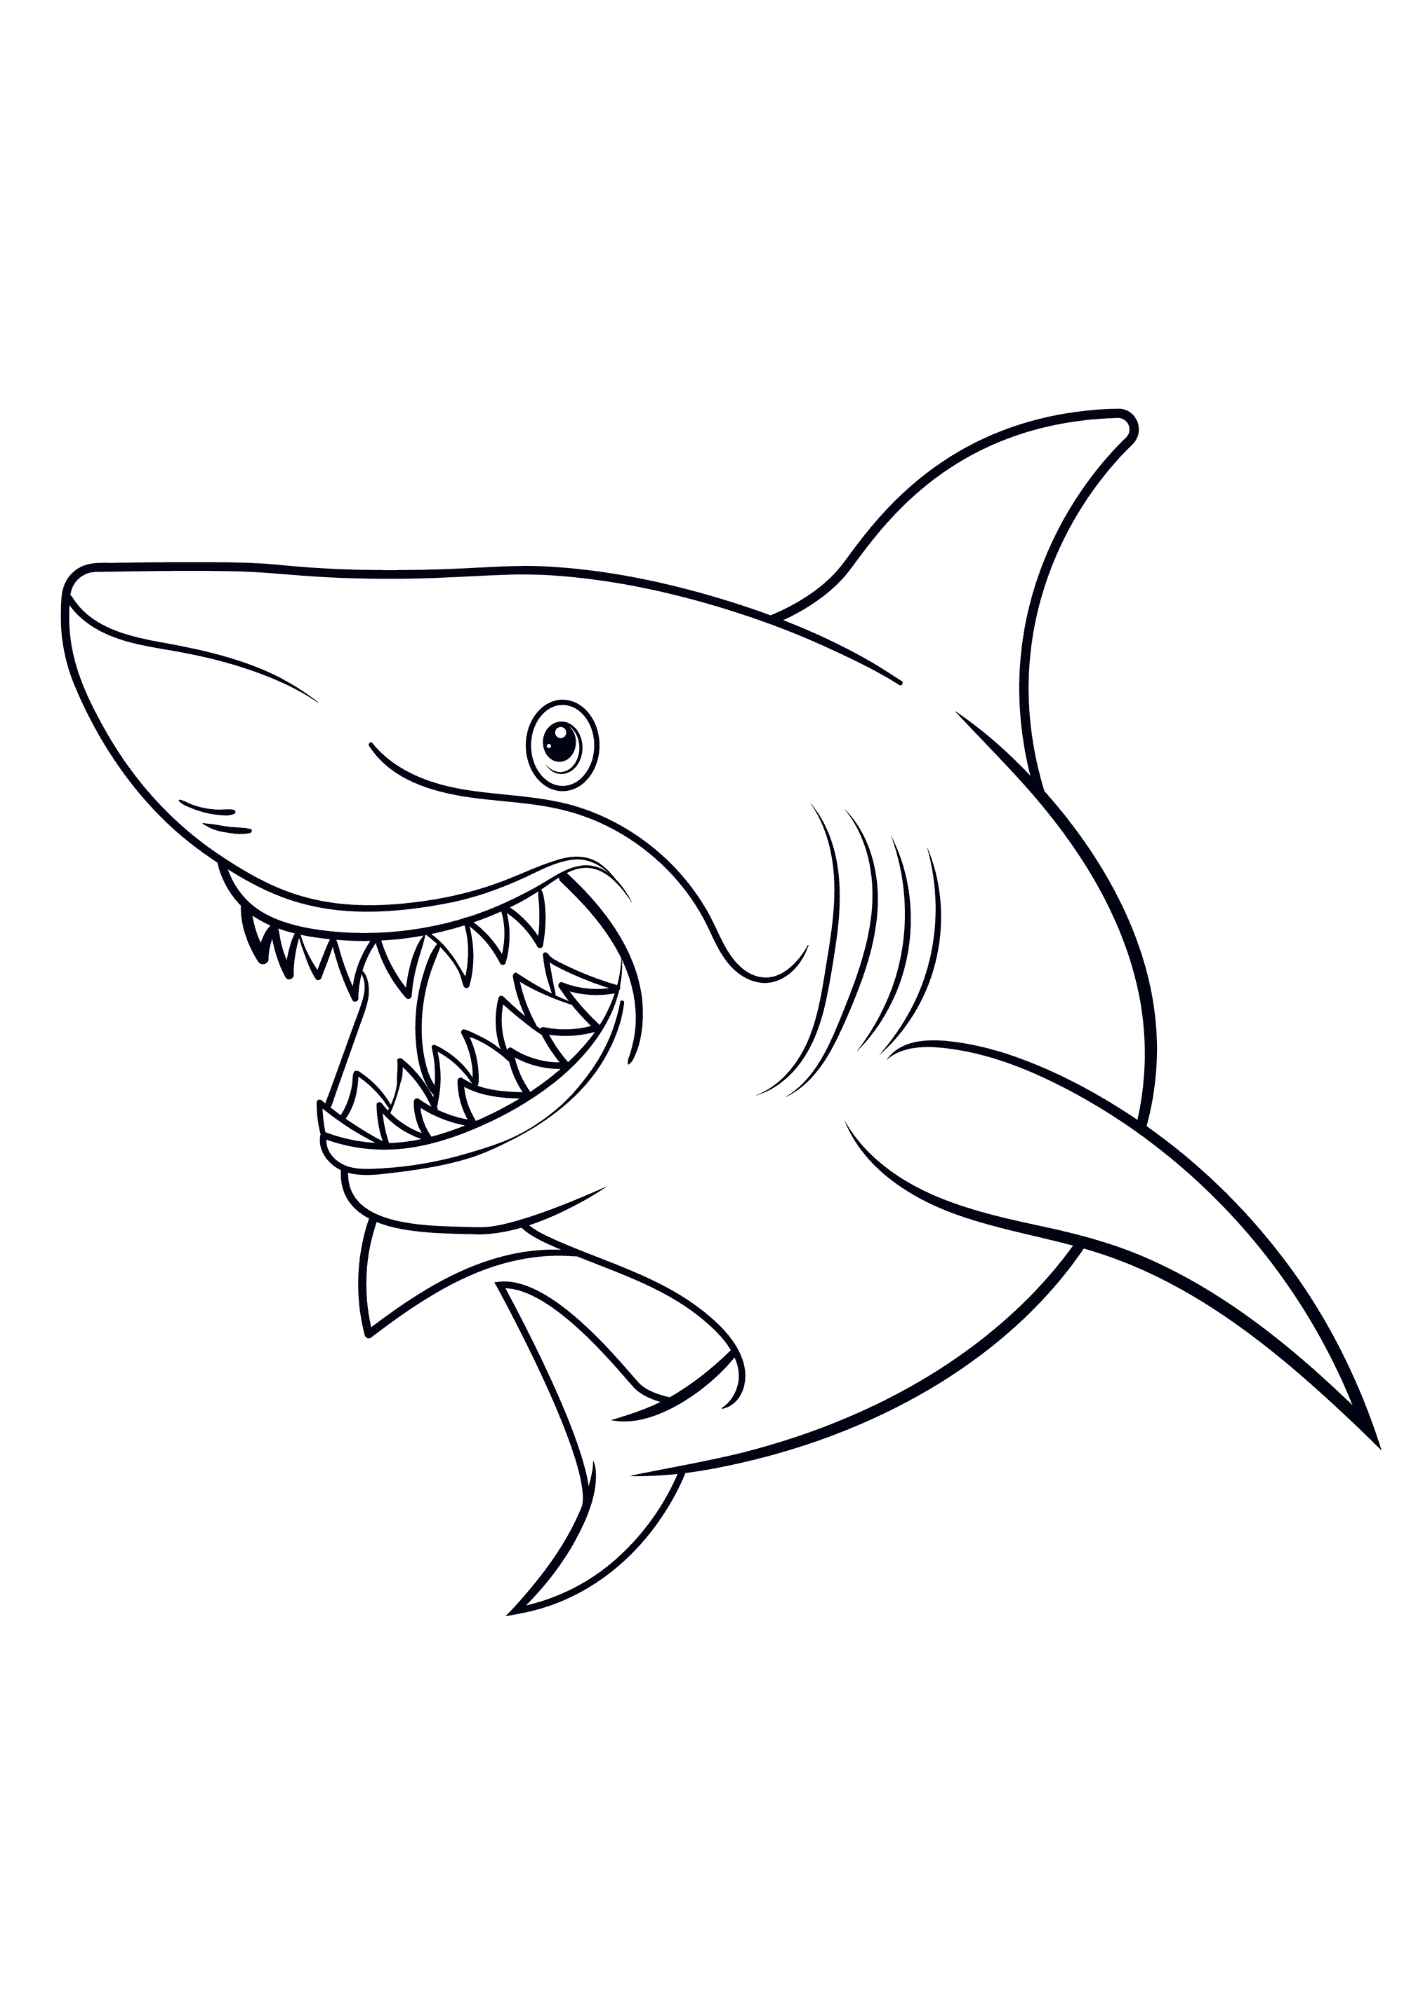 Simple Sharks Coloring Pages